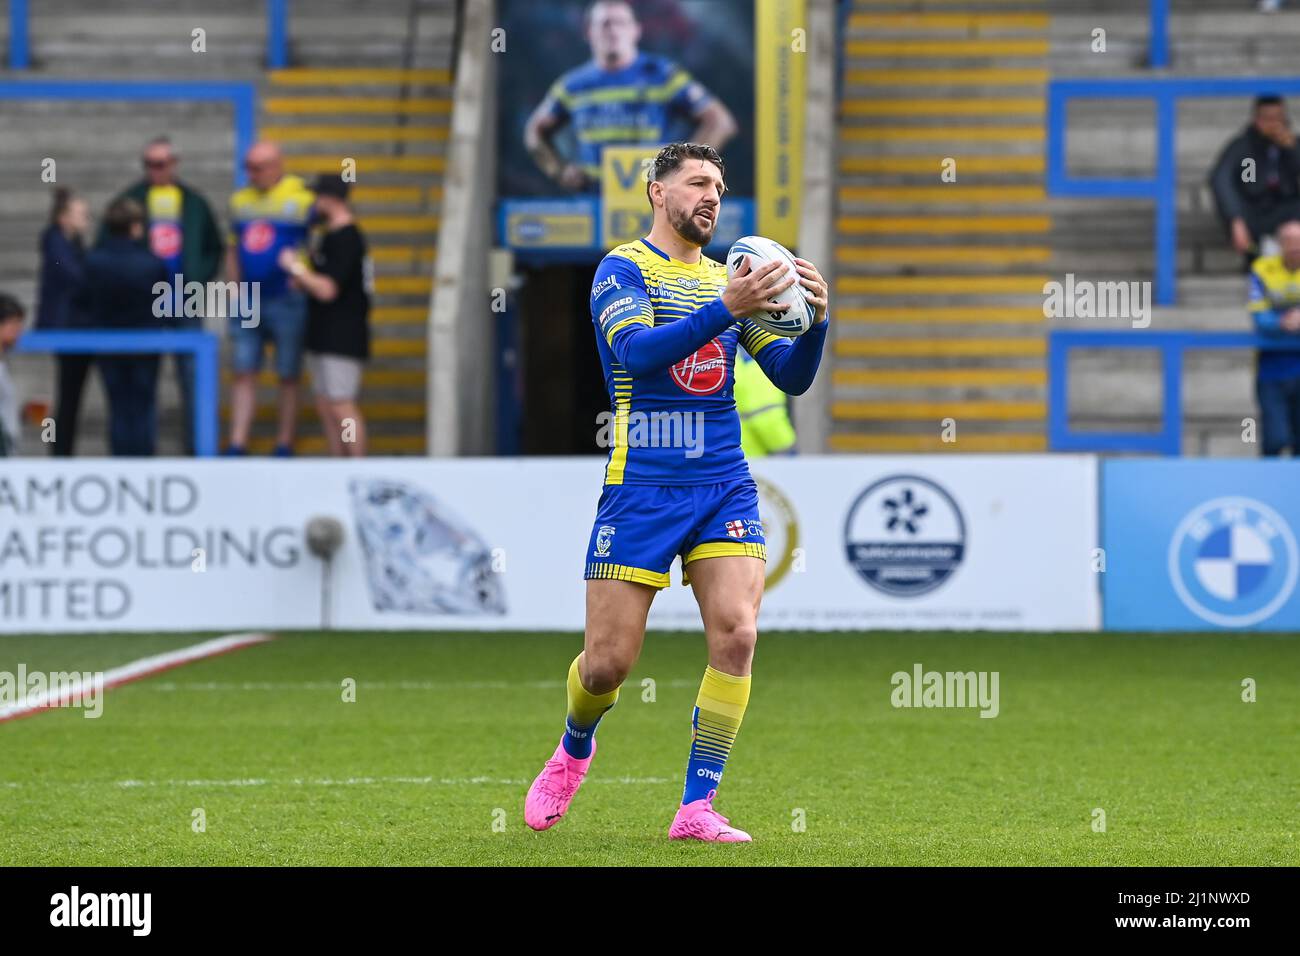 Gareth Widdop #6 of Warrington Wolves during pre match warm up in ,  on 3/27/2022. (Photo by Craig Thomas/News Images/Sipa USA) Stock Photo